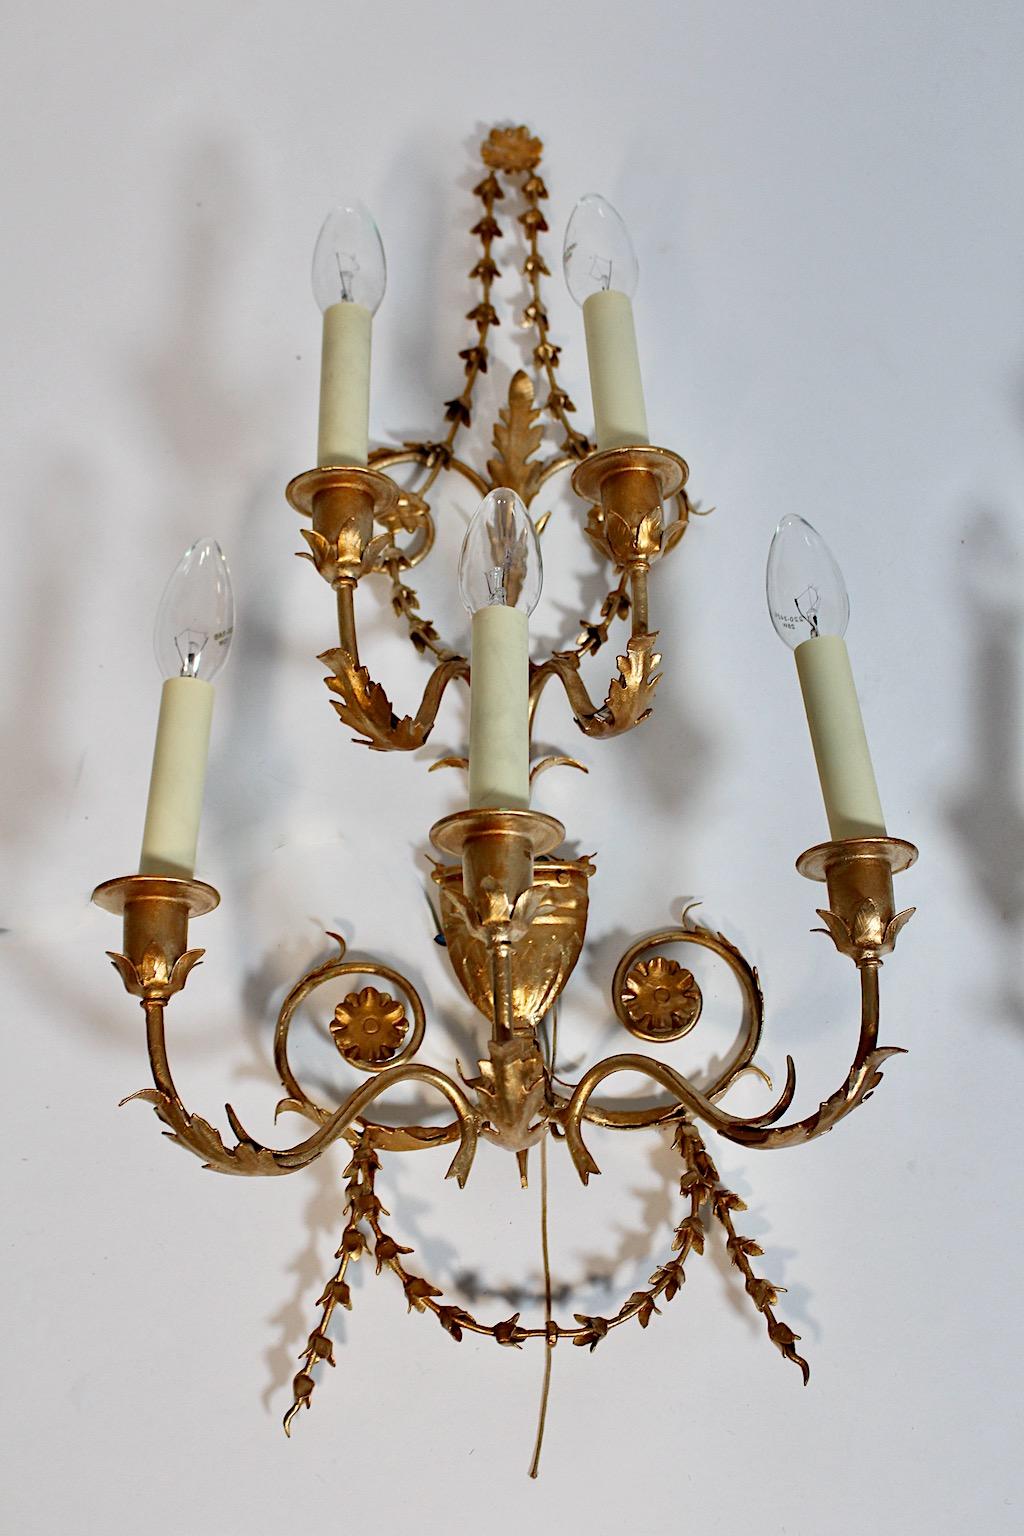 Hollywood Regency Style vintage pair duo sconces or wall lights from gilt metal 1970s Italy.
A richly decorated pair of sconces showing blossom garlands, leaves and vessel with 5 arms and 5 E 14 sockets. Easy to hang up on the upper end of the